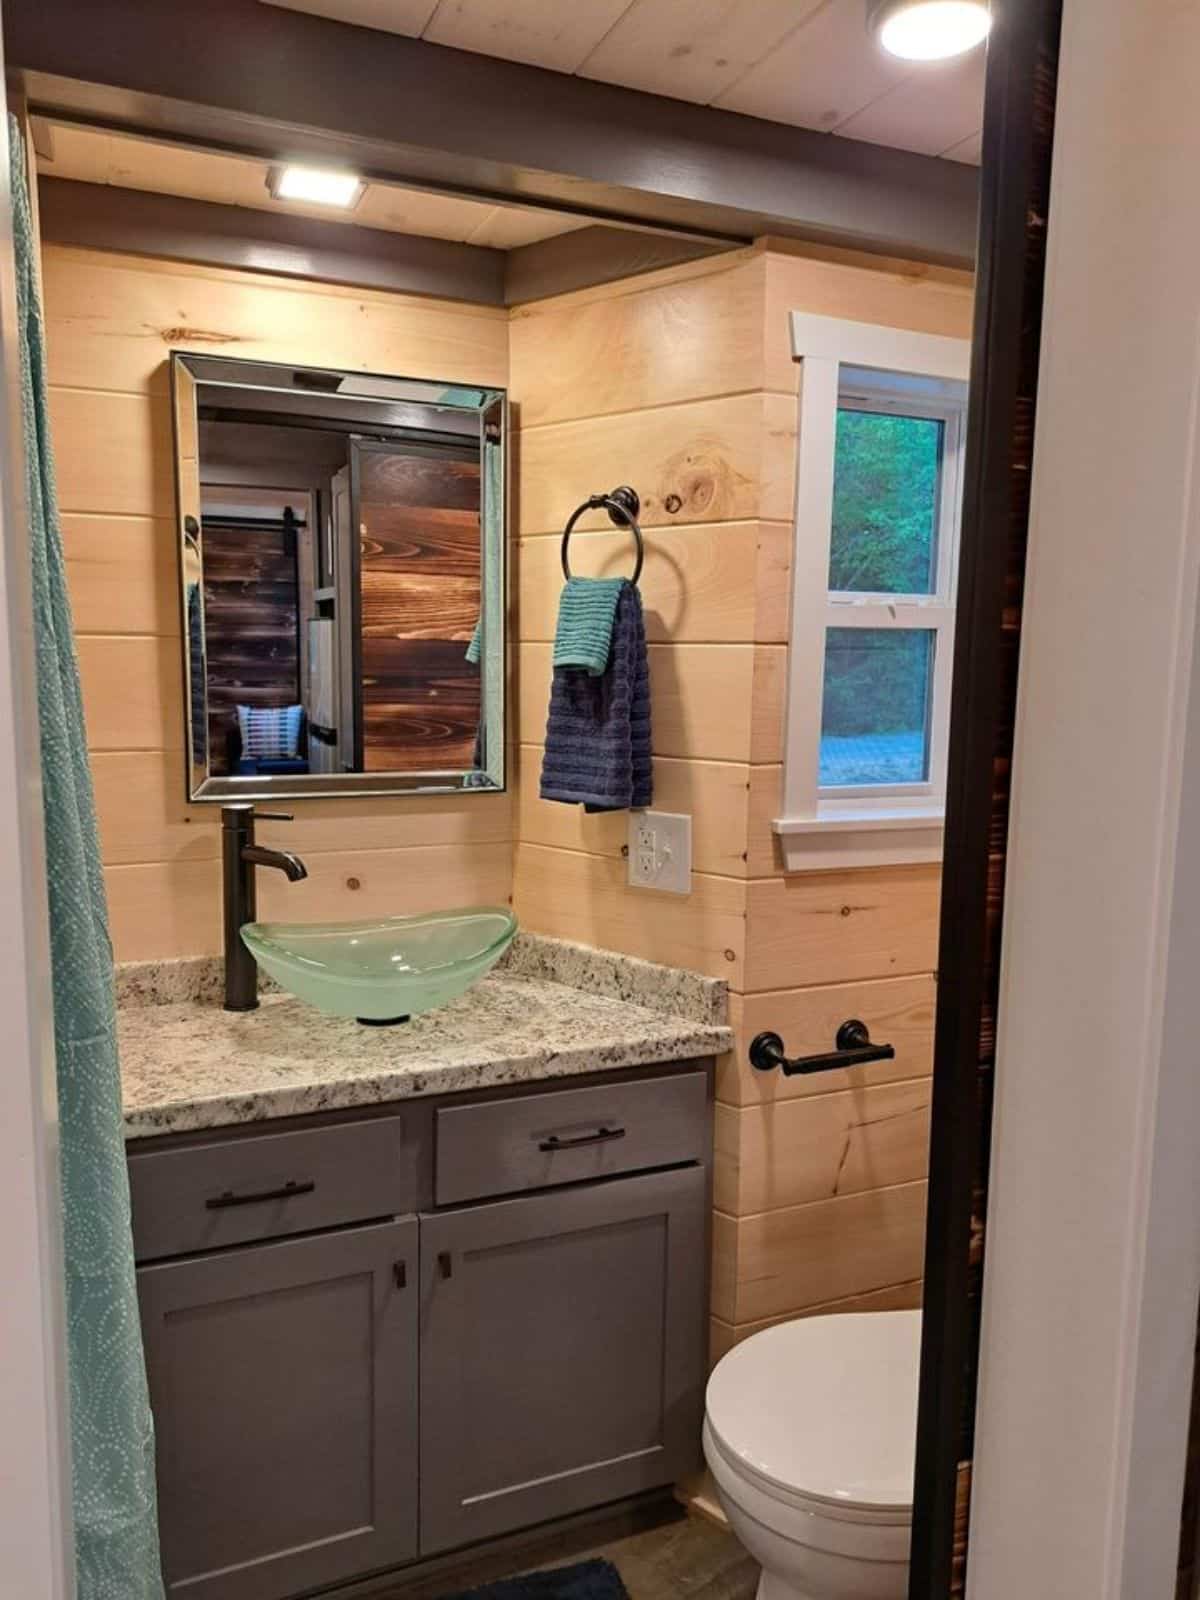 standard toilet, sink with vanity and mirror in bathroom of 30’ tiny house on wheels